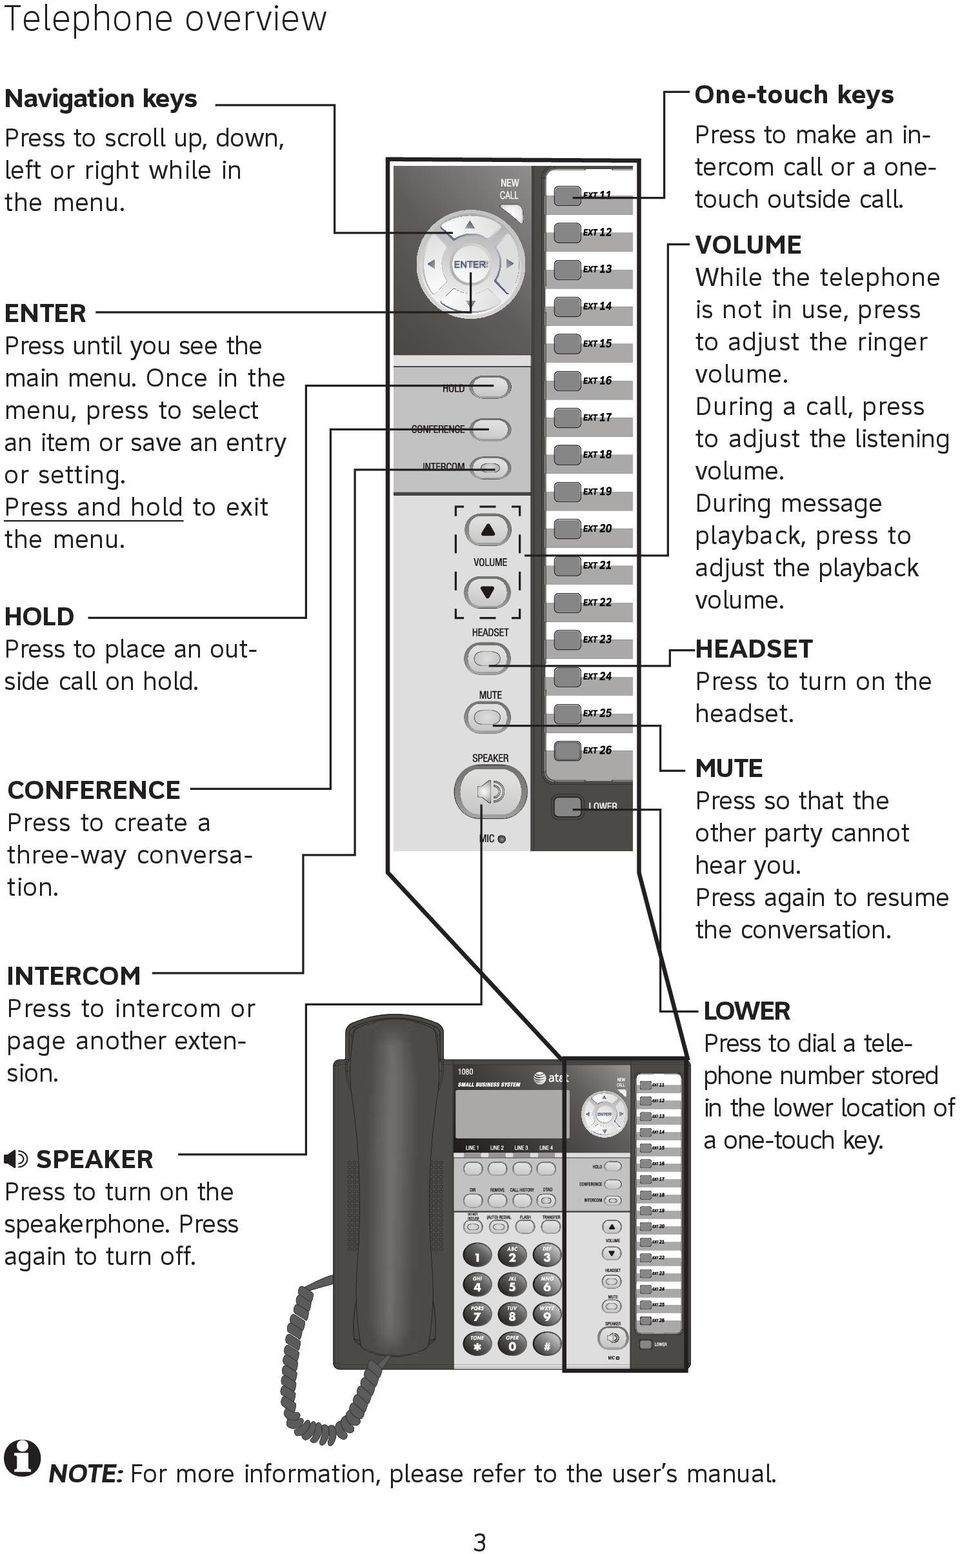 CONFERENCE Press to create a three-way conversation. INTERCOM Press to intercom or page another extension. SPEAKER Press to turn on the speakerphone. Press again to turn off.